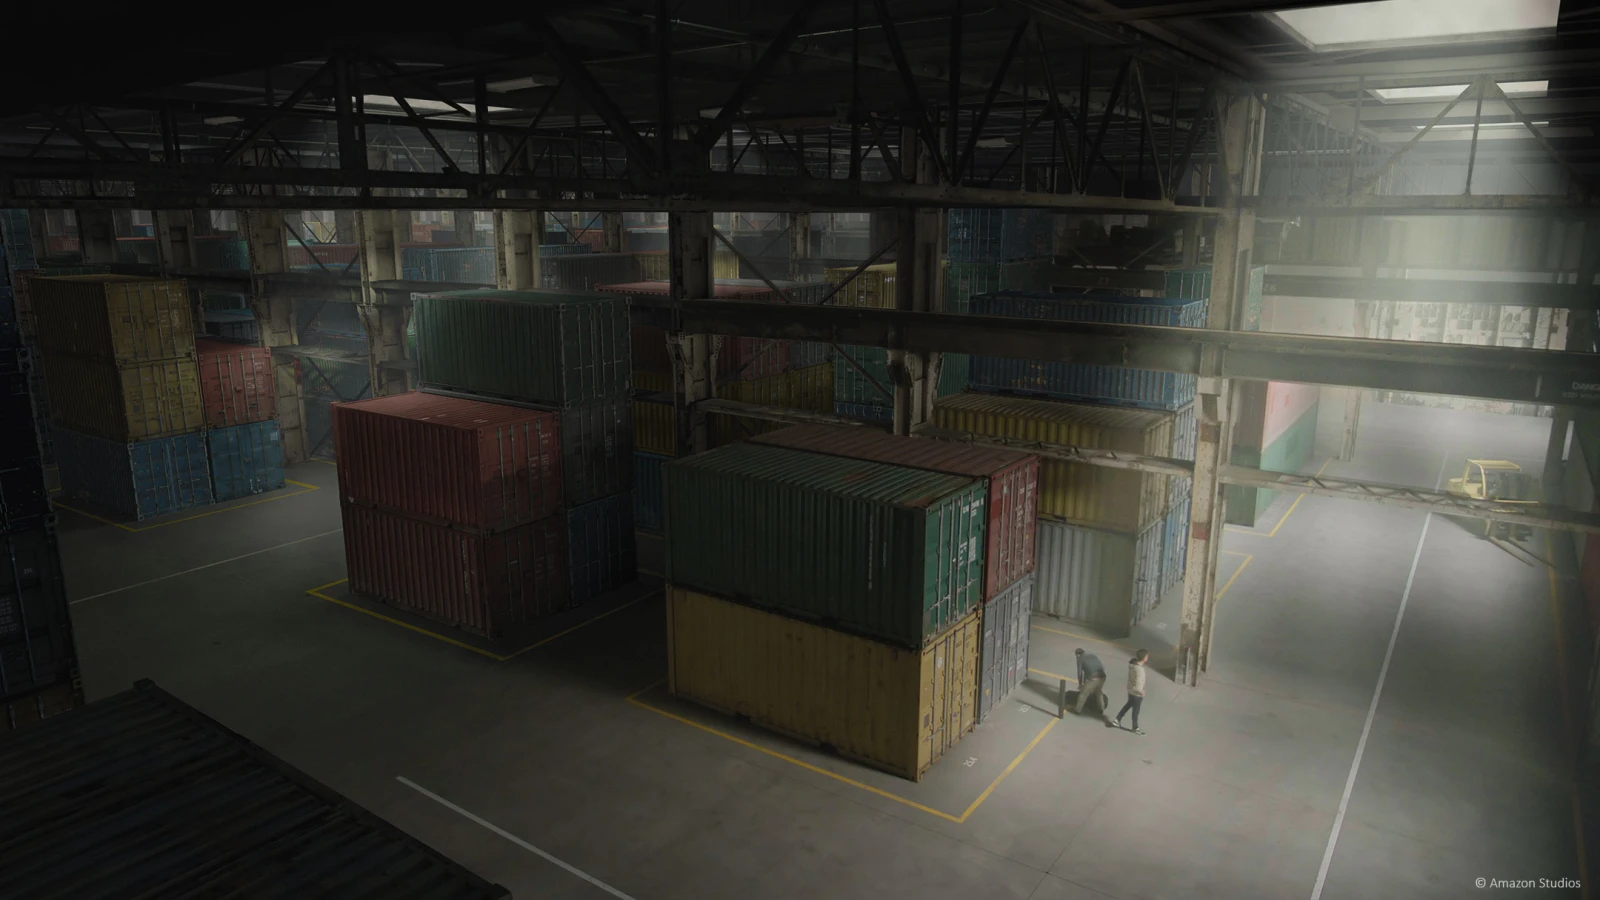  Tom Clancy’s Jack Ryan S01 container warehouse view shot Raynault vfx 